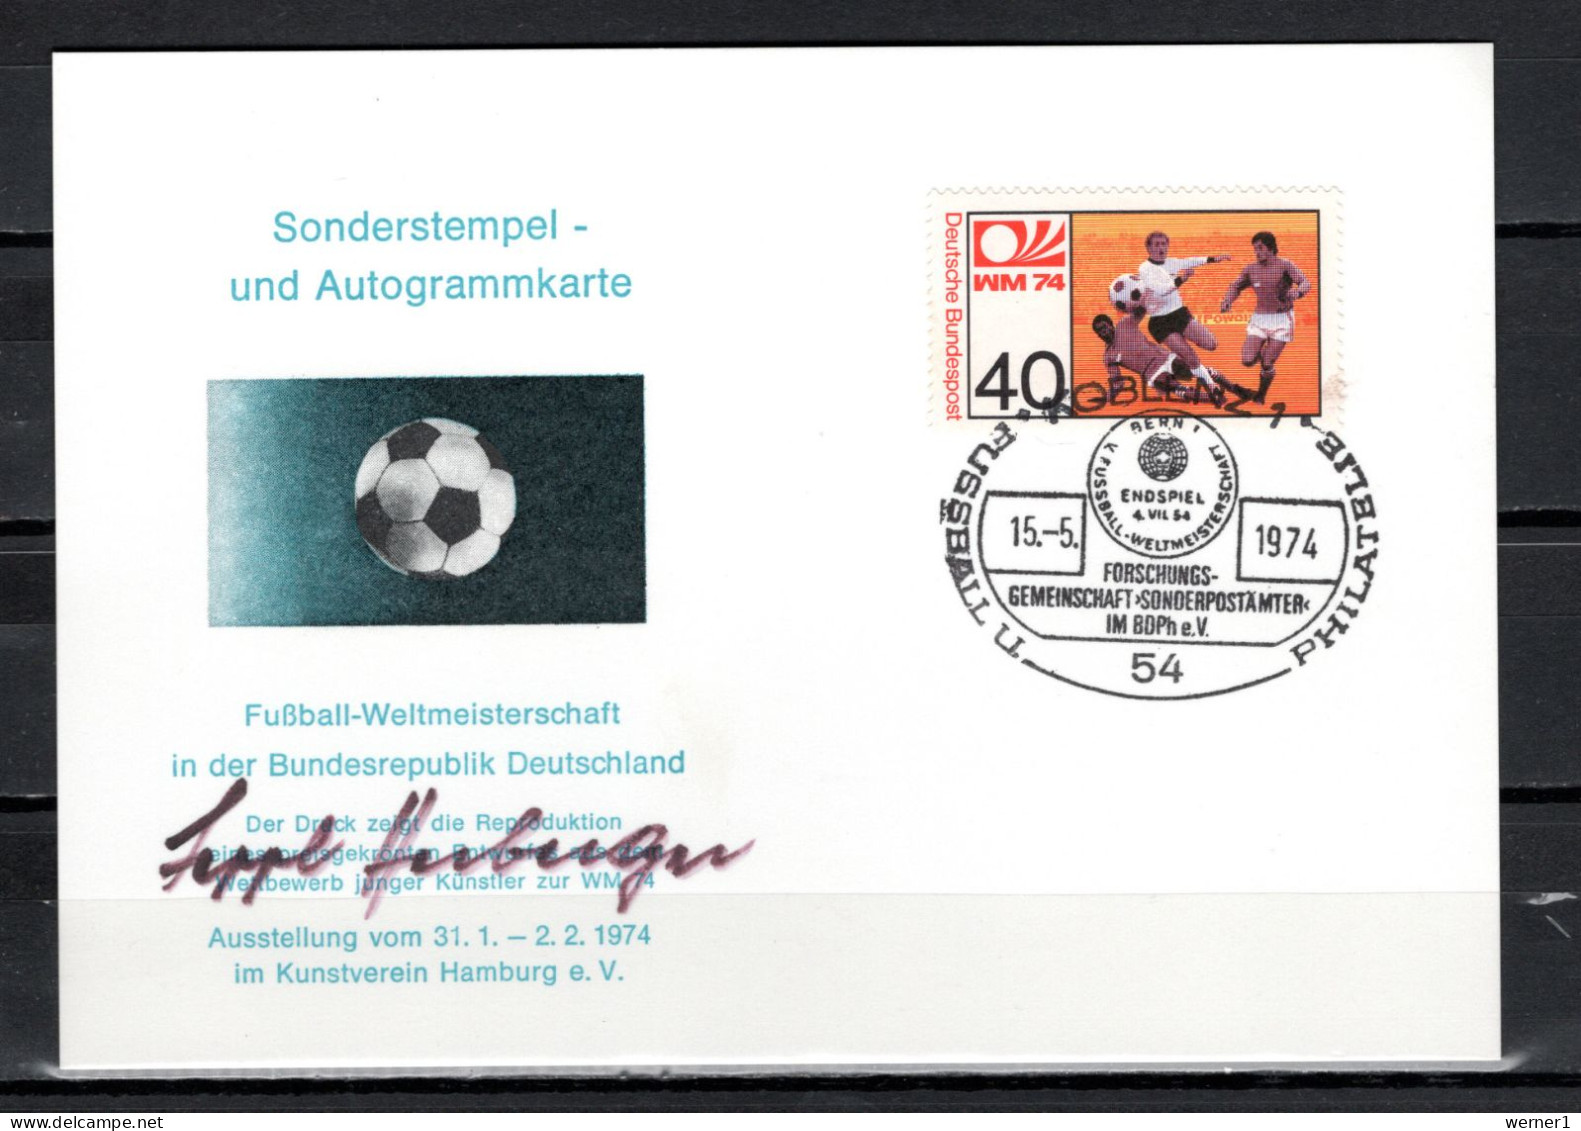 Germany 1974 Football Soccer World Cup Autograph Postcard With Original Signature Of Sepp Herberger - 1974 – Germania Ovest